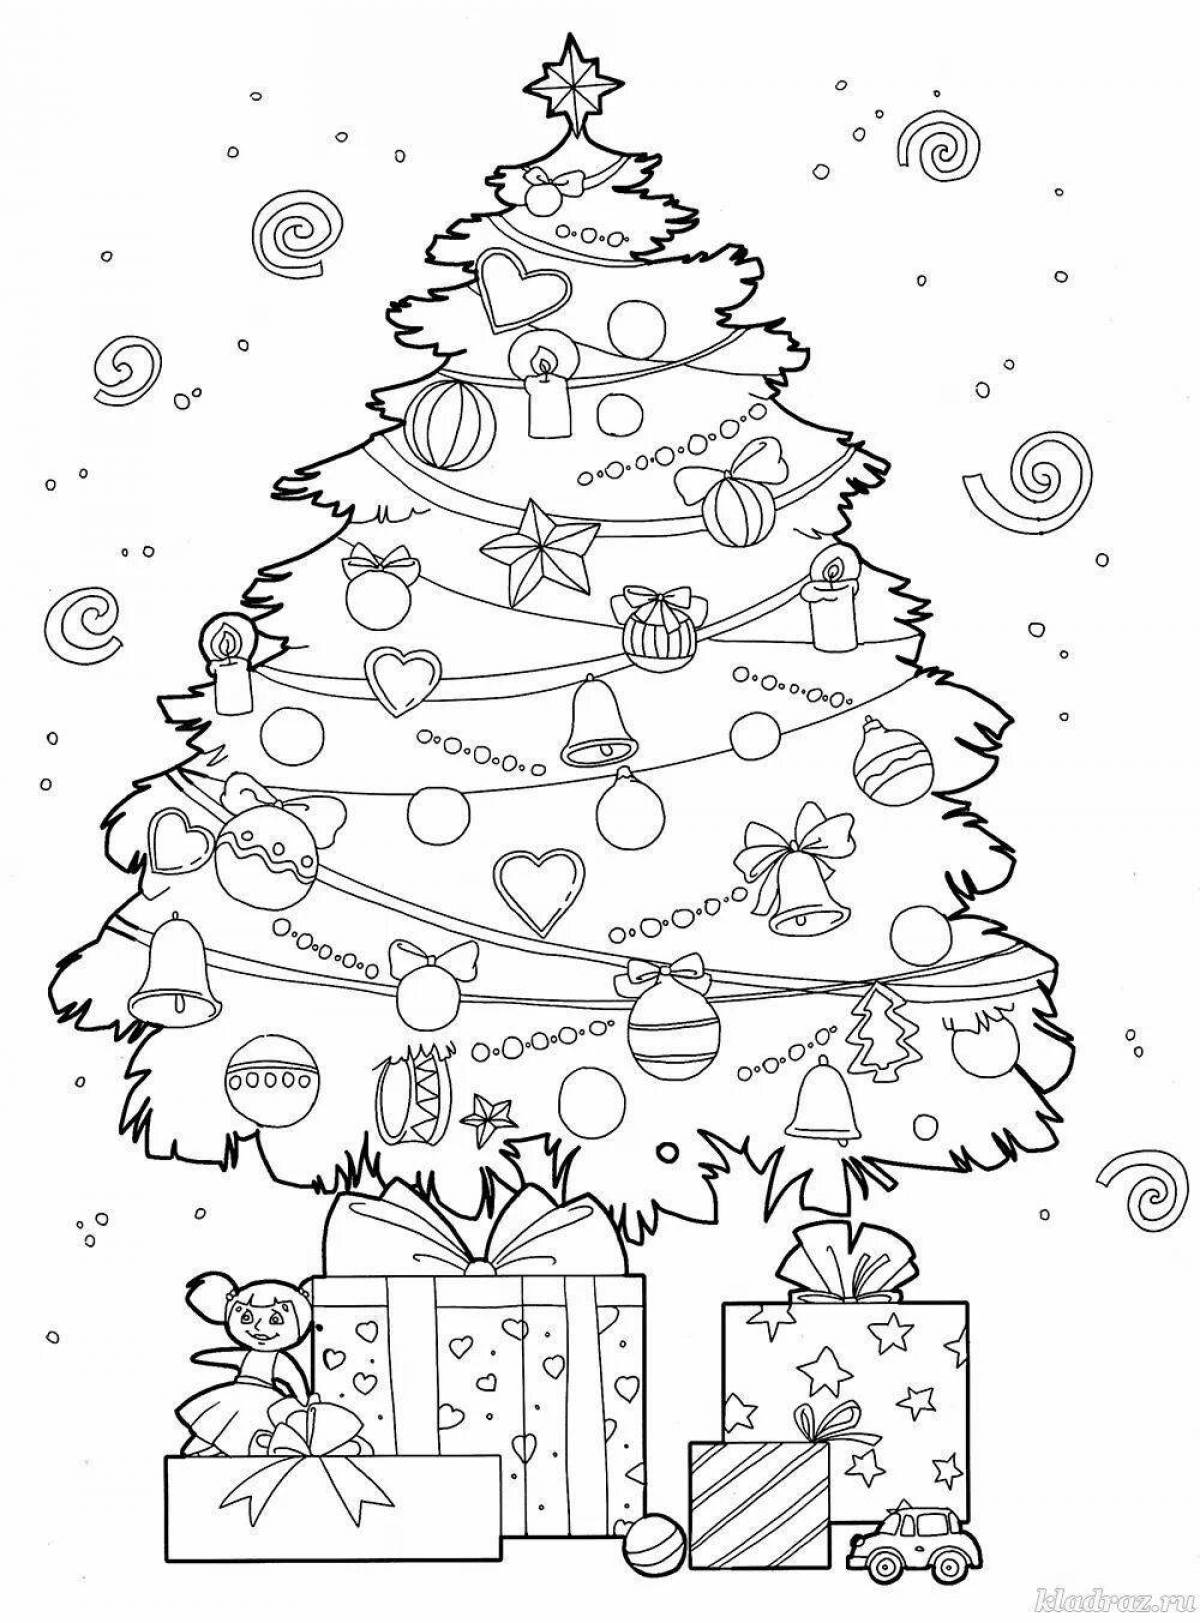 Gorgeous Christmas tree coloring book for 6-7 year olds